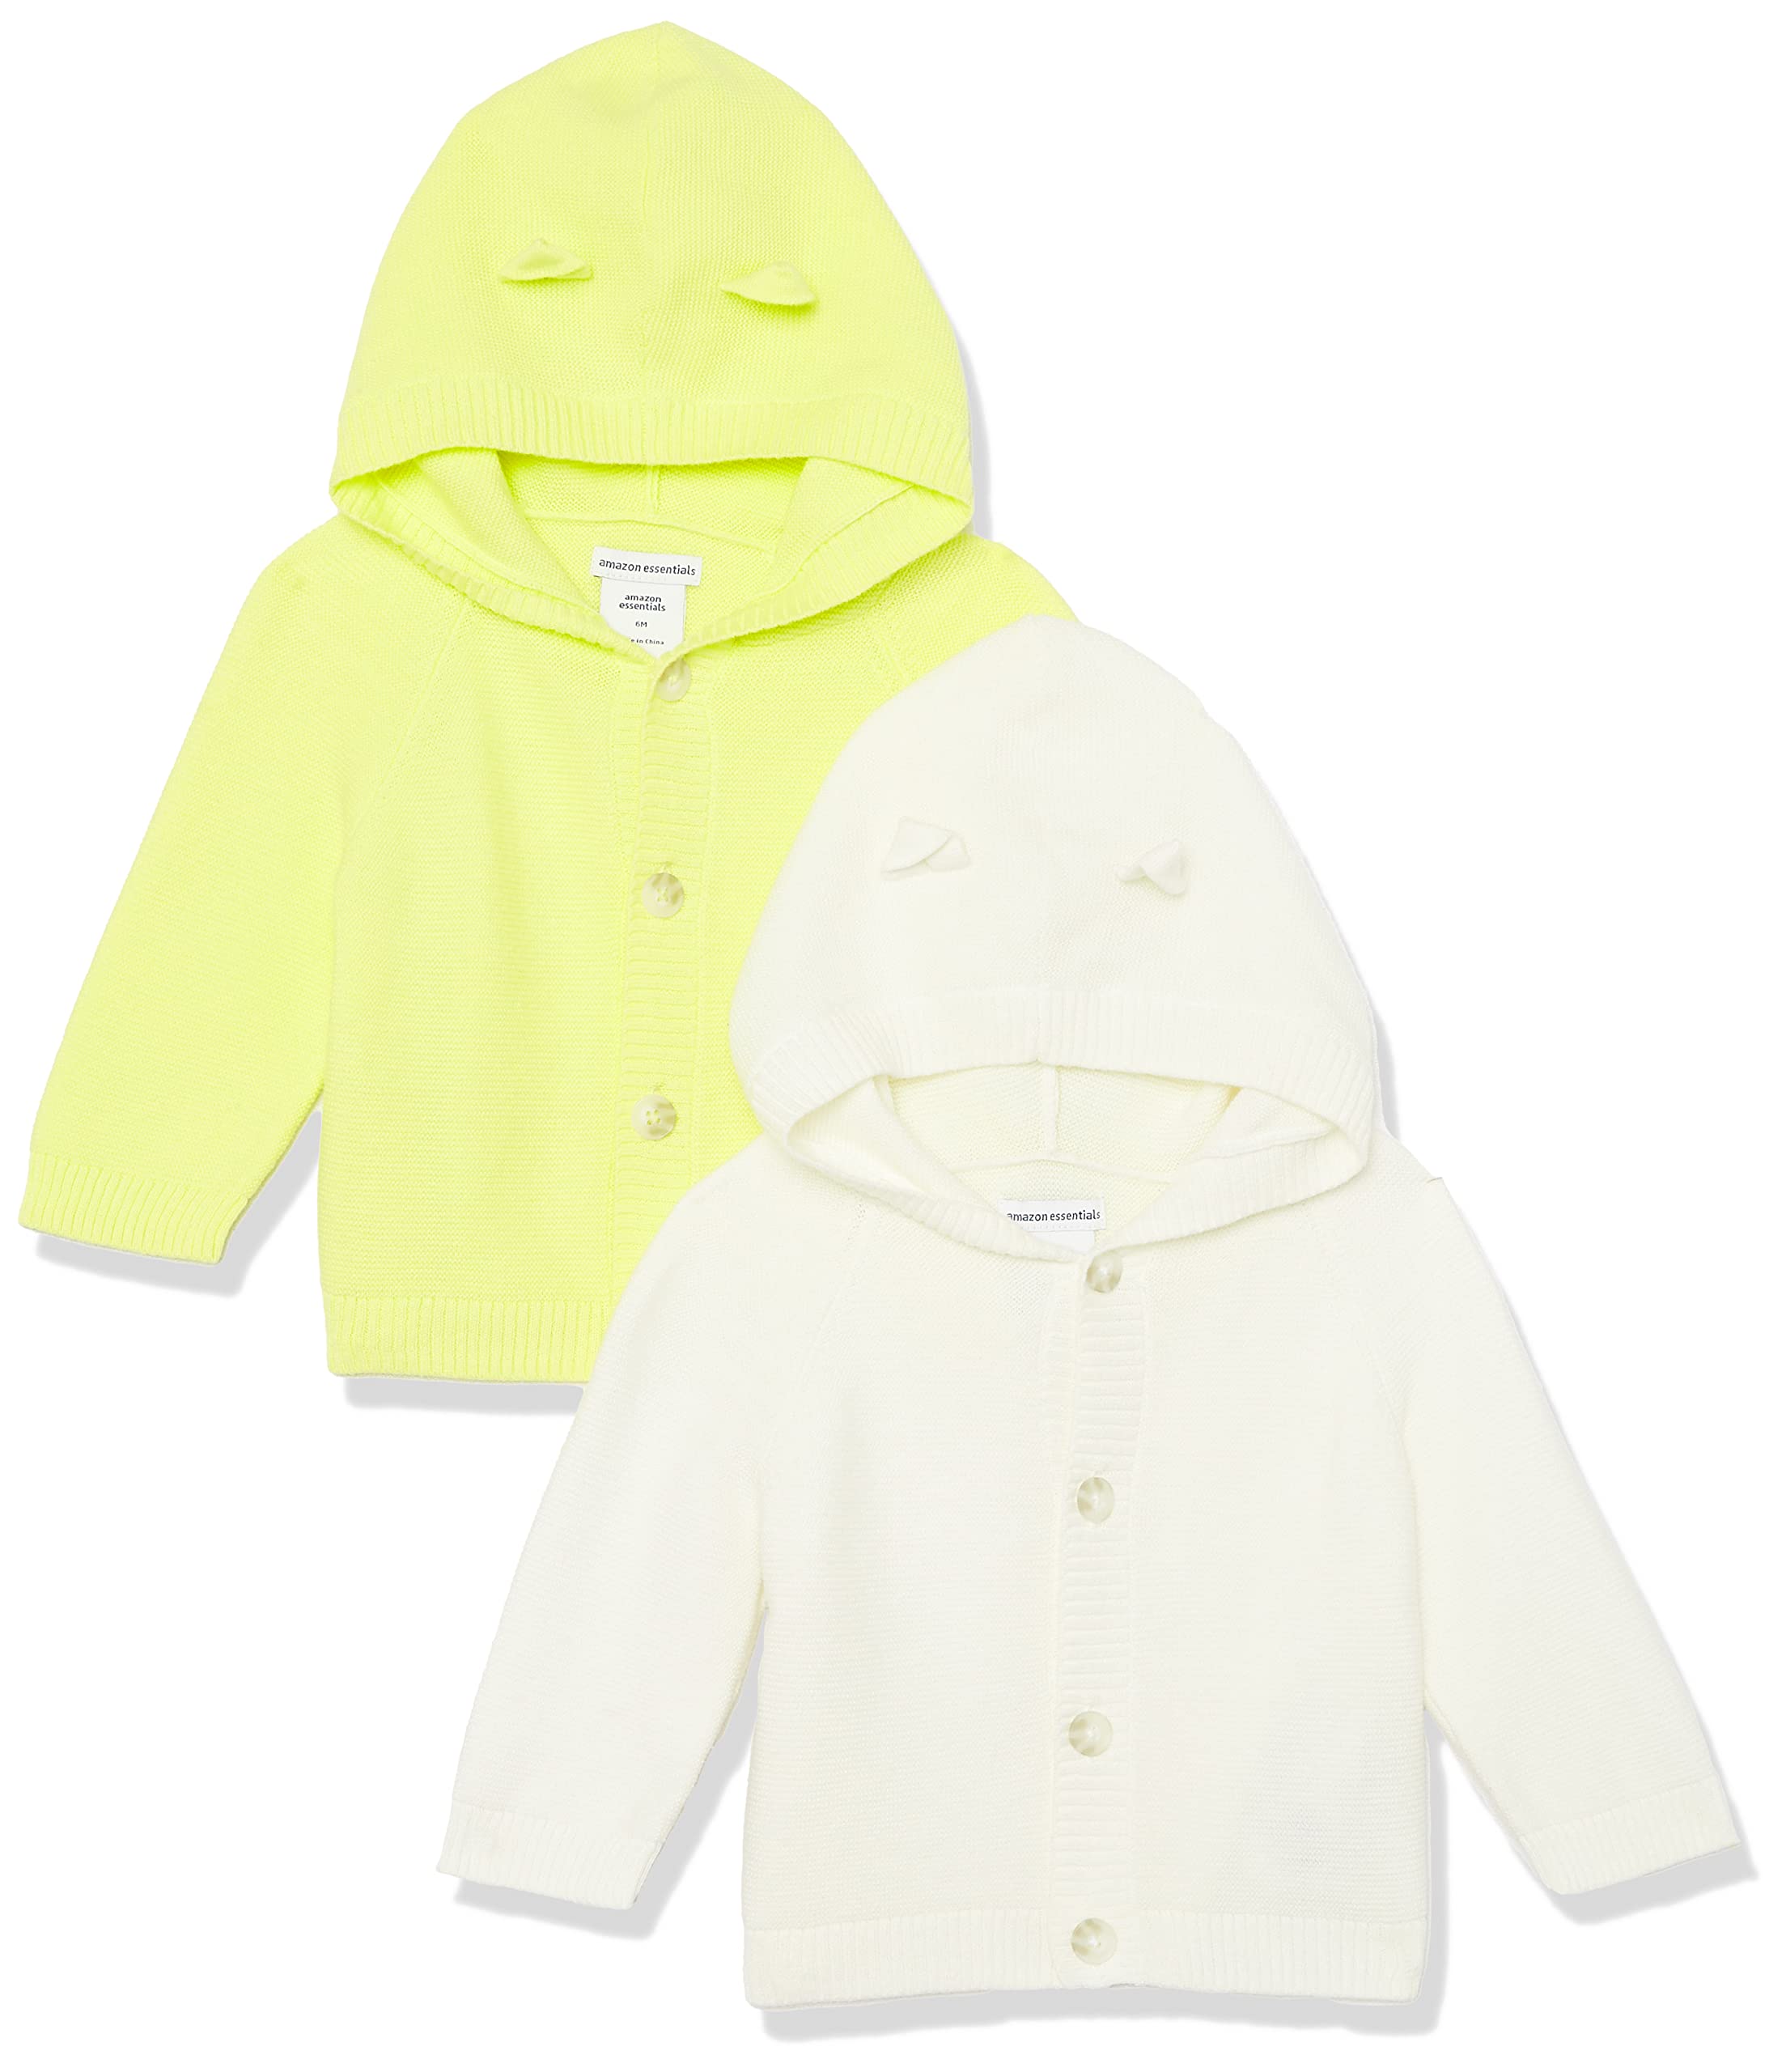 Amazon Essentials Unisex Babies' Hooded Sweater, Pack of 2